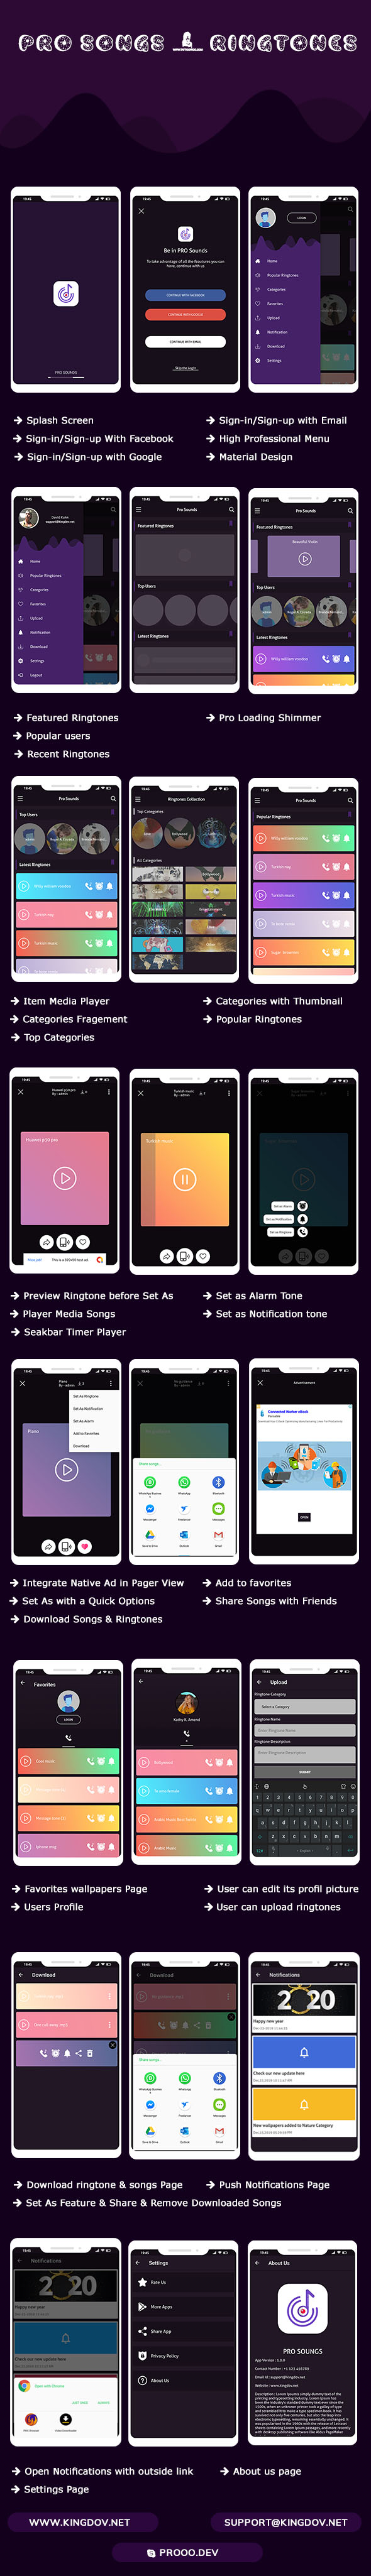 Pro Souds & Ringtones Collection 2020 - AdMob & Facebook Ads & Push Notifications - 2